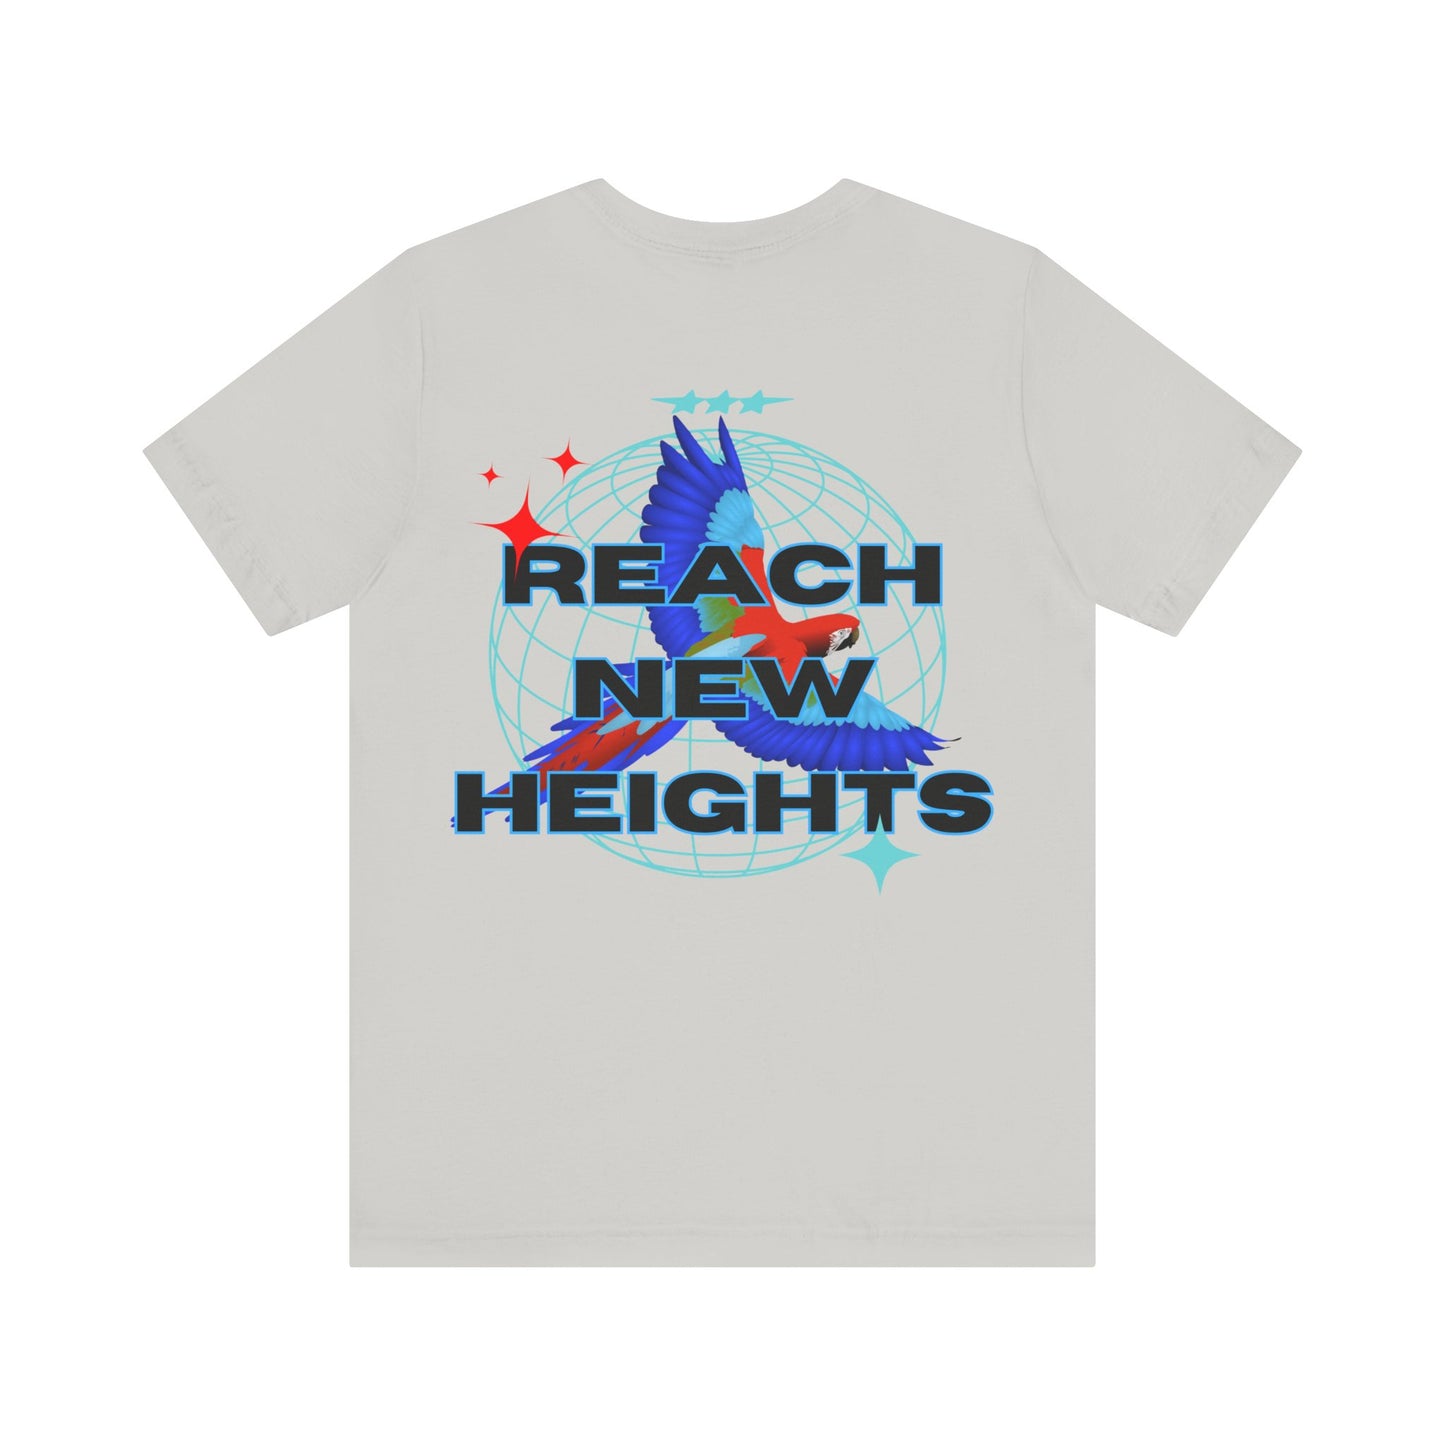 "REACH NEW HEIGHTS" Graphic T-Shirt